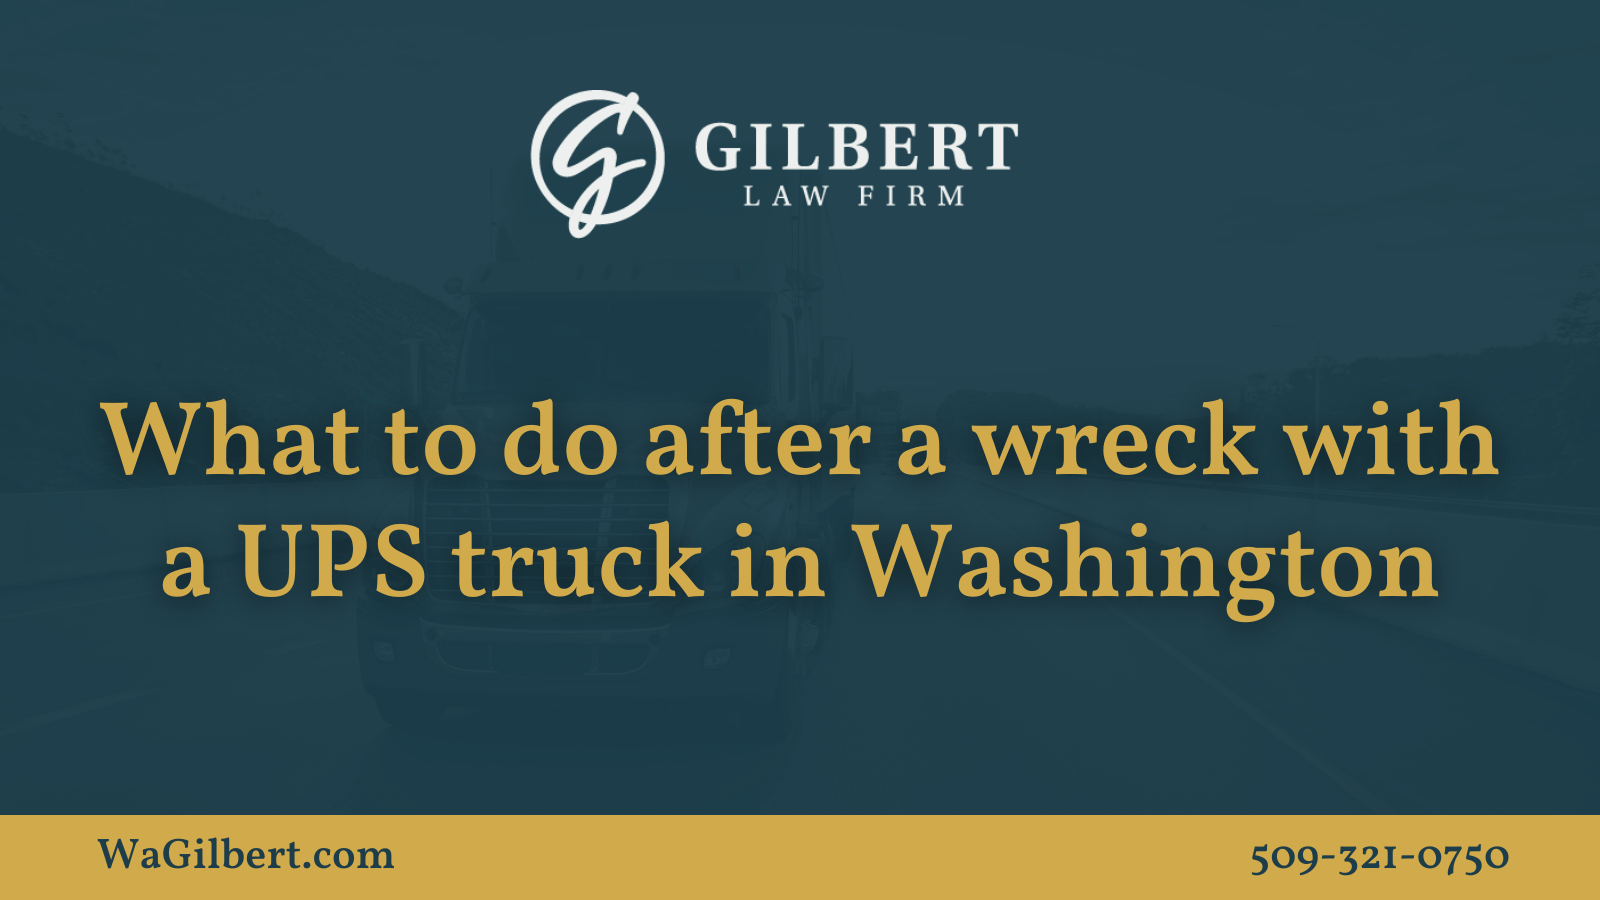 What to do after a wreck with a UPS truck in Washington | Gilbert Law Firm Spokane Washington